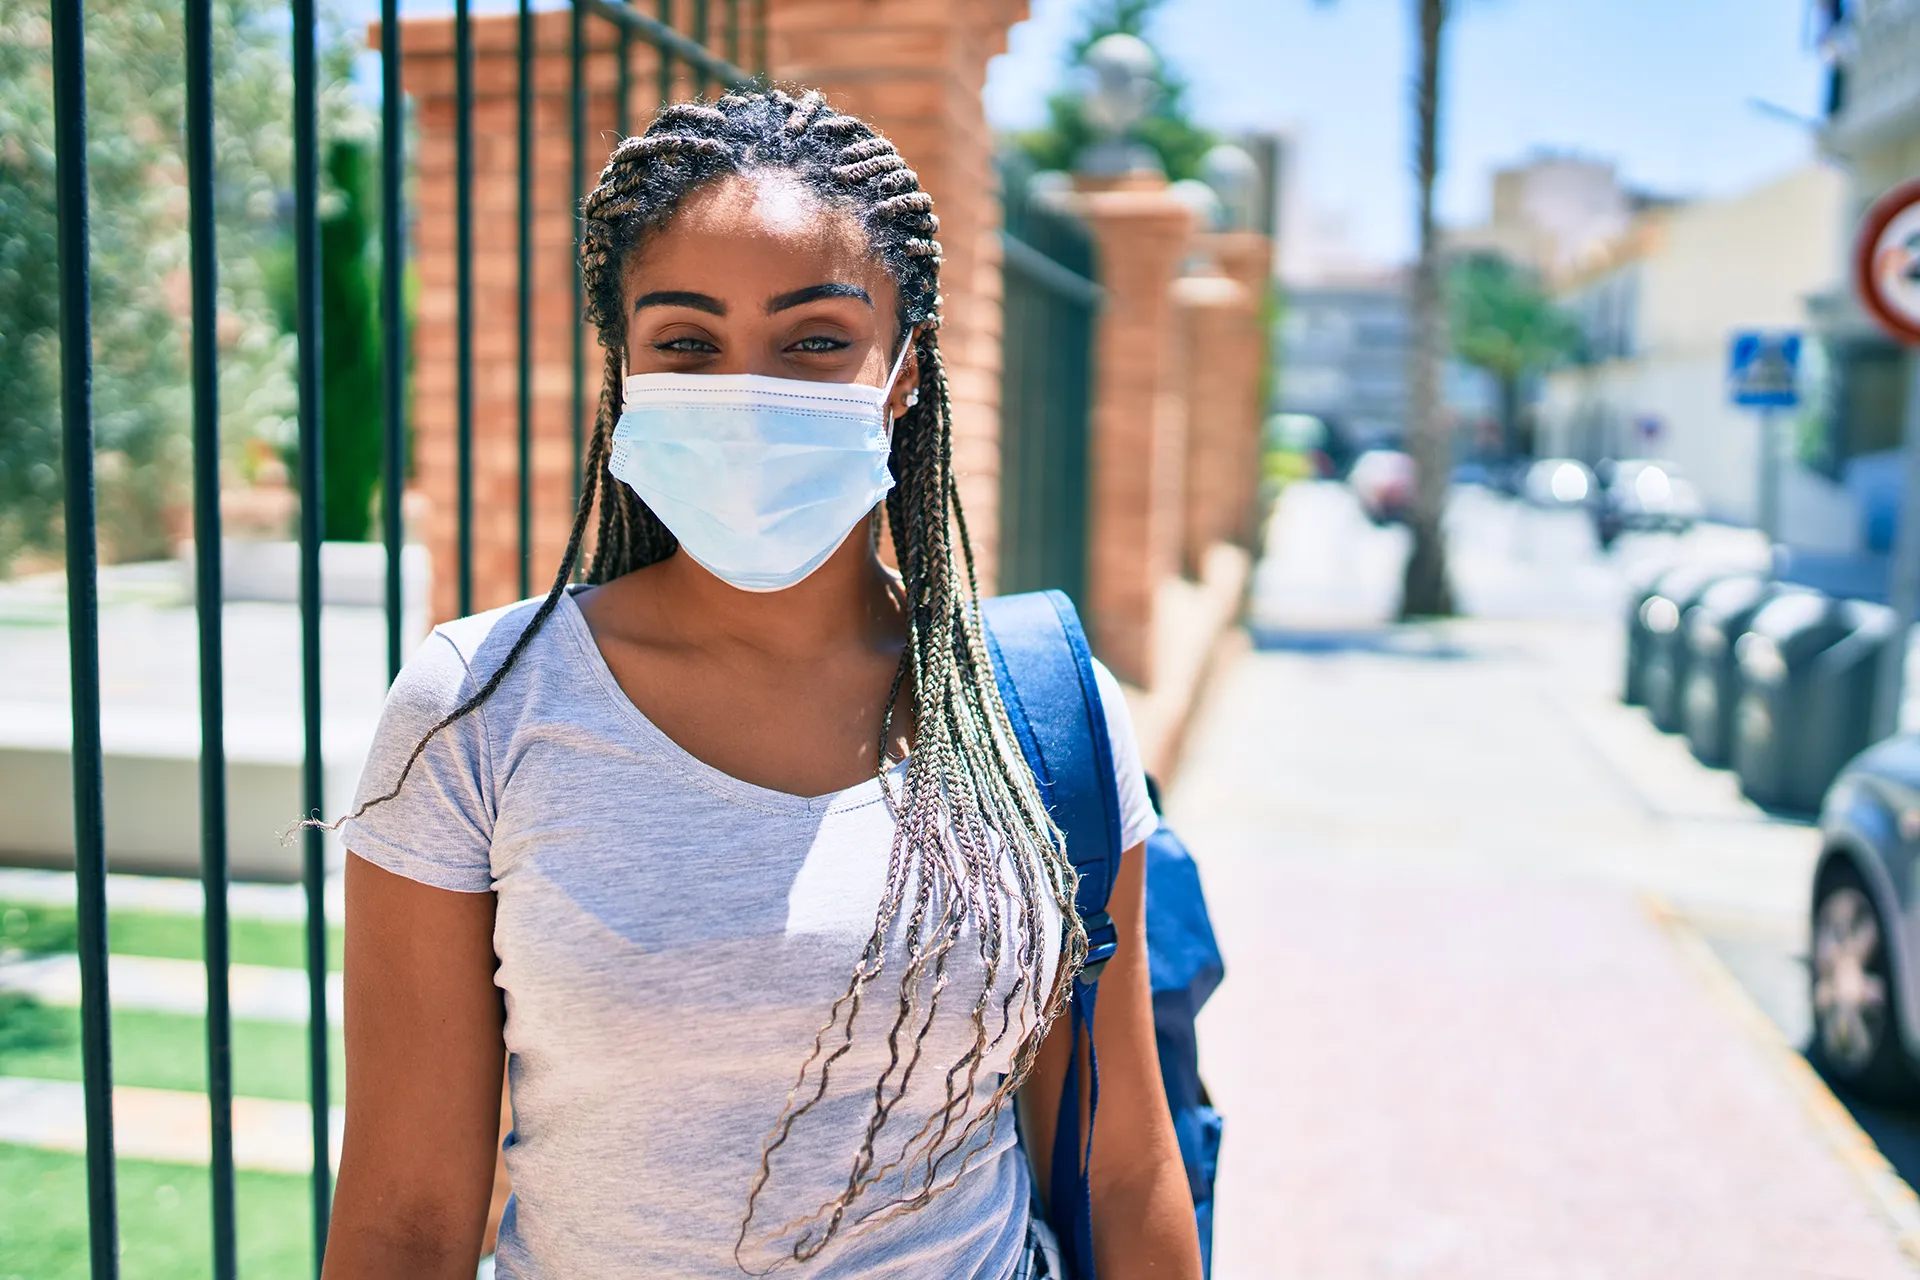 Student outside with n95 mask on